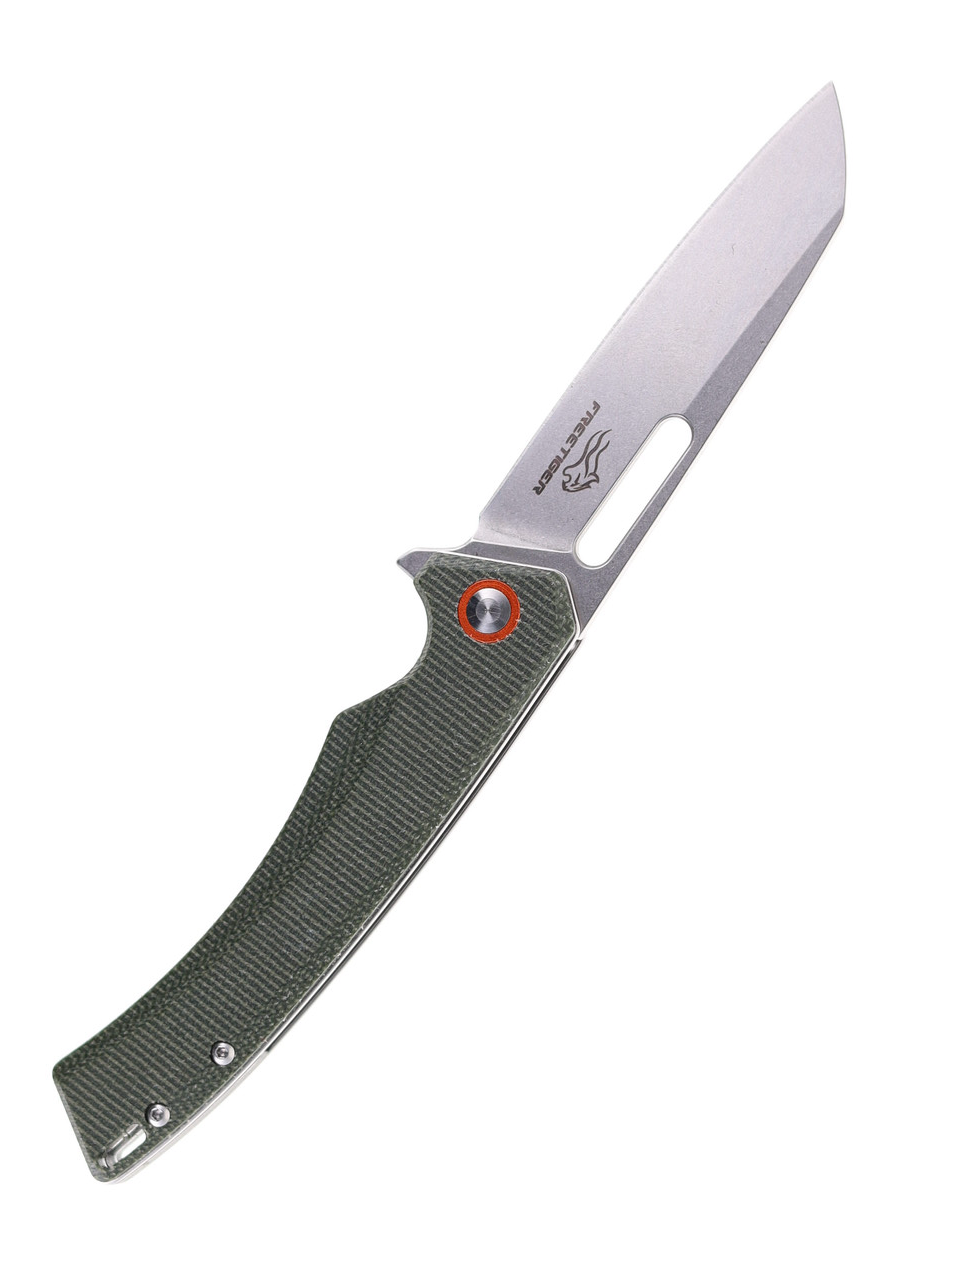 product image for Freetiger FT 957 Green Folding Knife with Flax Fiber Handle and D2 Plain Edge Stonewash Finish